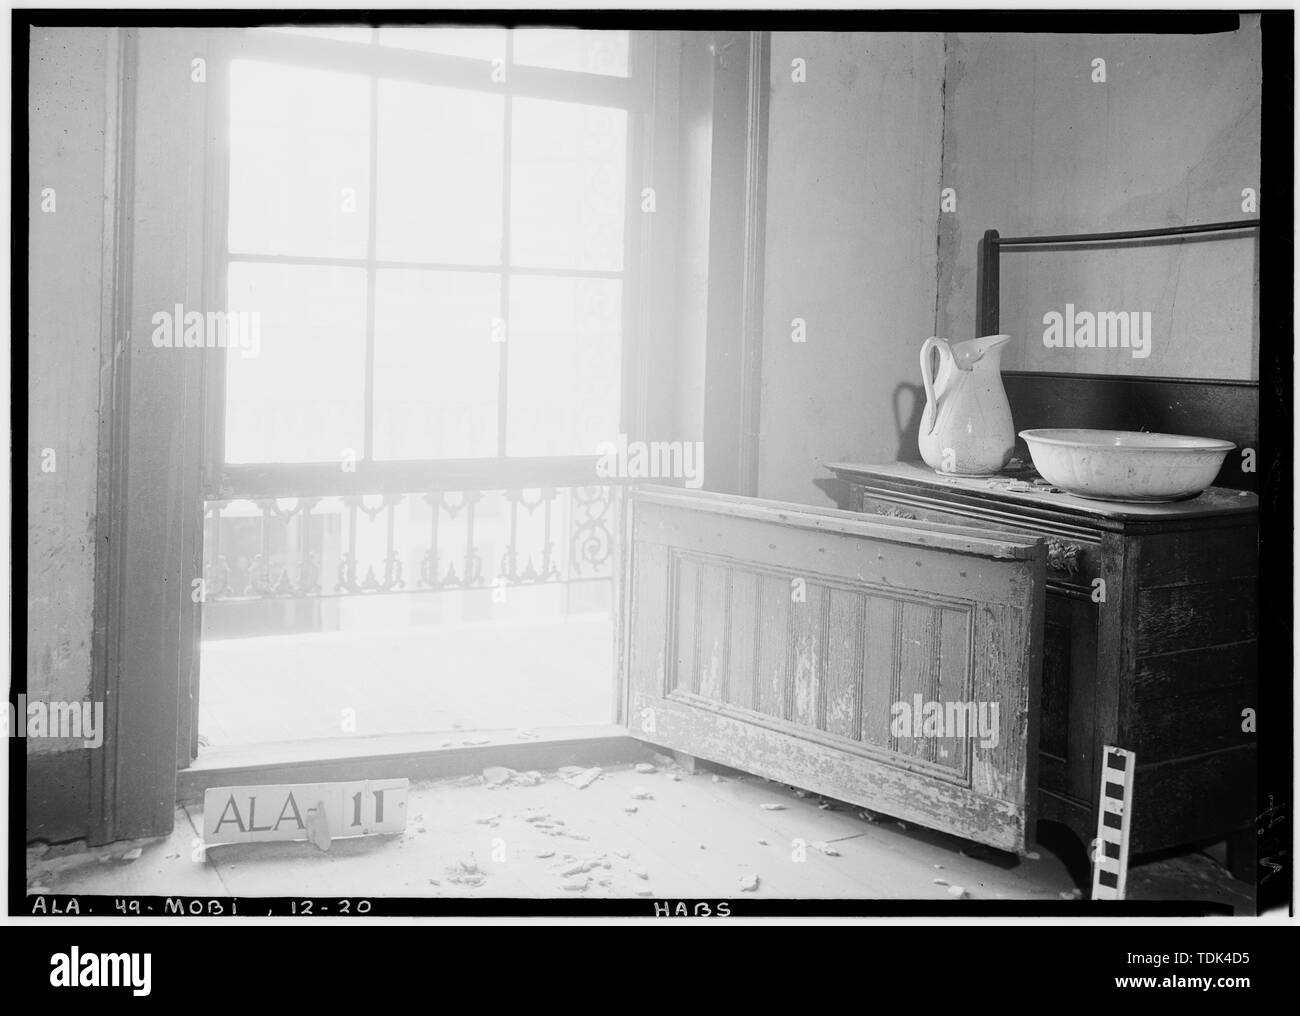 Historic American Buildings Survey E. W. Russell, Photographer, June 13, 1935 ONE TYPE OF JIB DOOR AT BOTTOM OF WINDOW, FRONT SECOND FLOOR - Southern Hotel, 53-65 Water Street, Mobile, Mobile County, AL Stock Photo